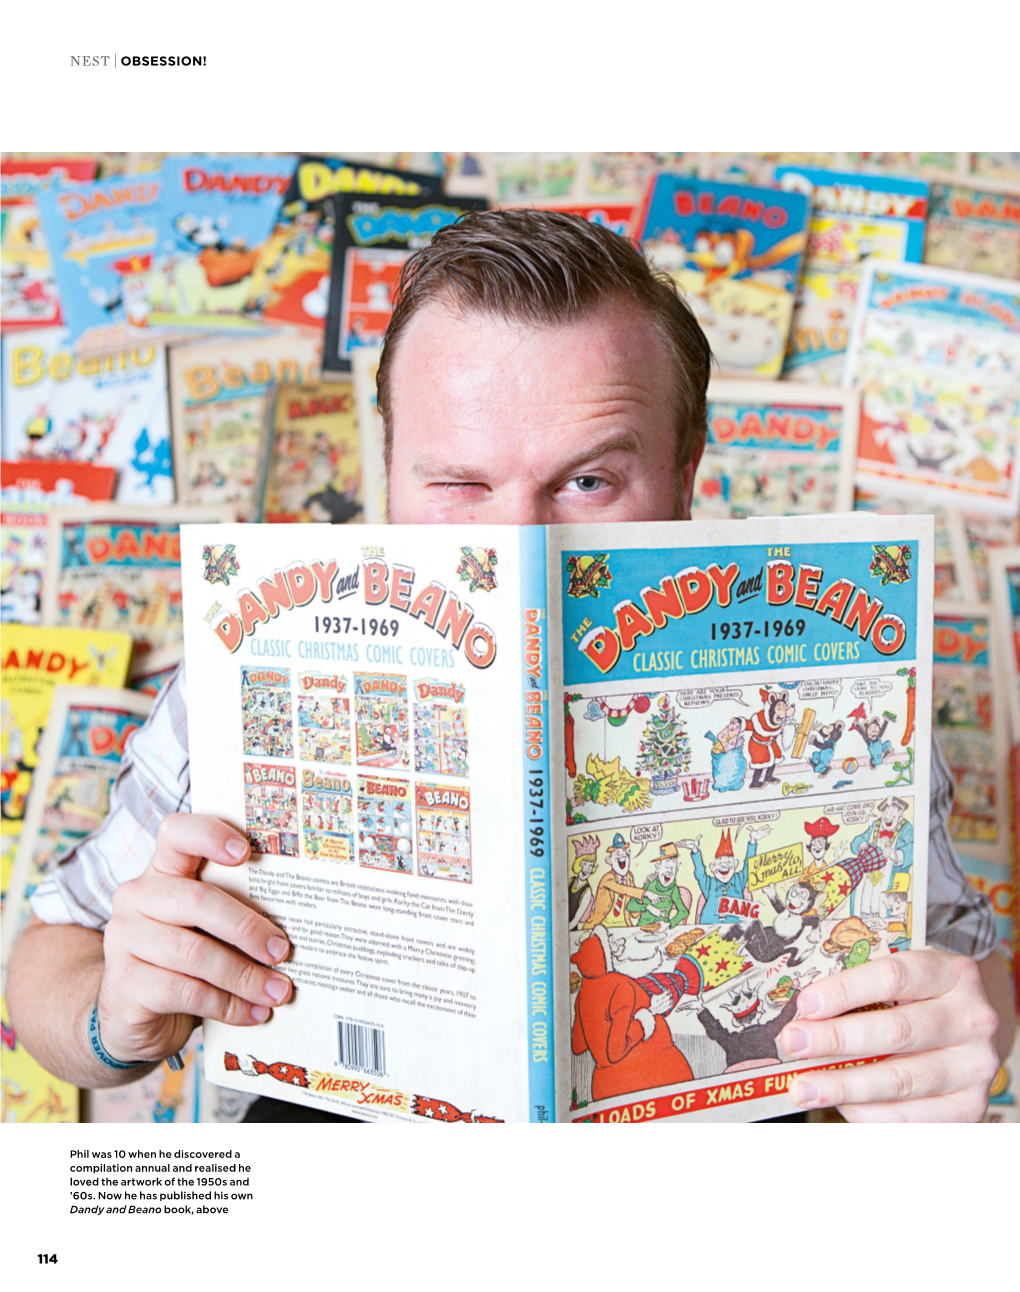 Collector of Dandy and Beano Annuals